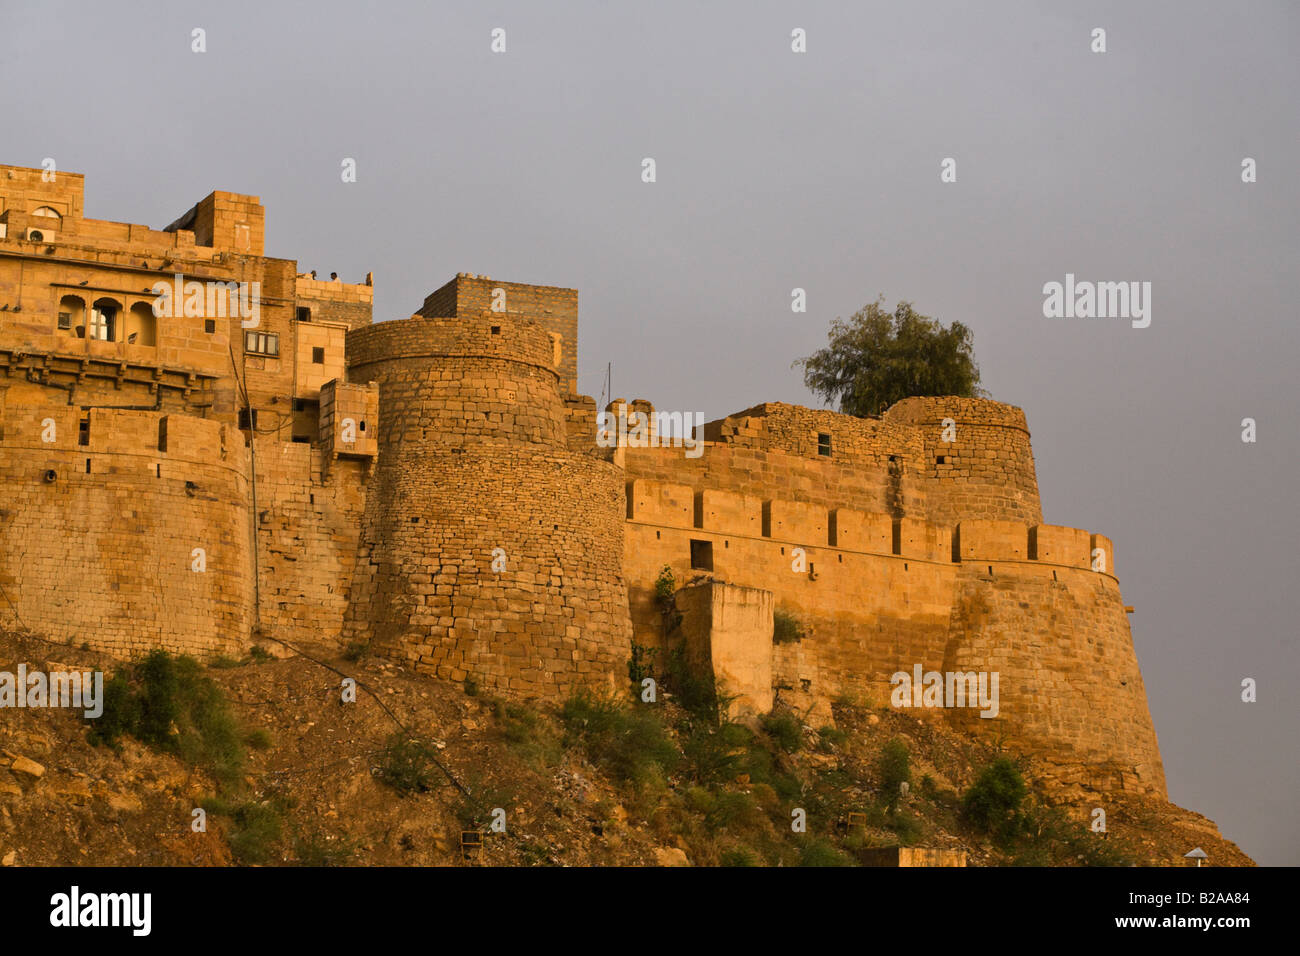 Two of the ninety nine BASTIONS of the outer wall of JAISALMER FORT built in 1156 on Trikuta Hill out of sandstone RAJASTHAN IND Stock Photo